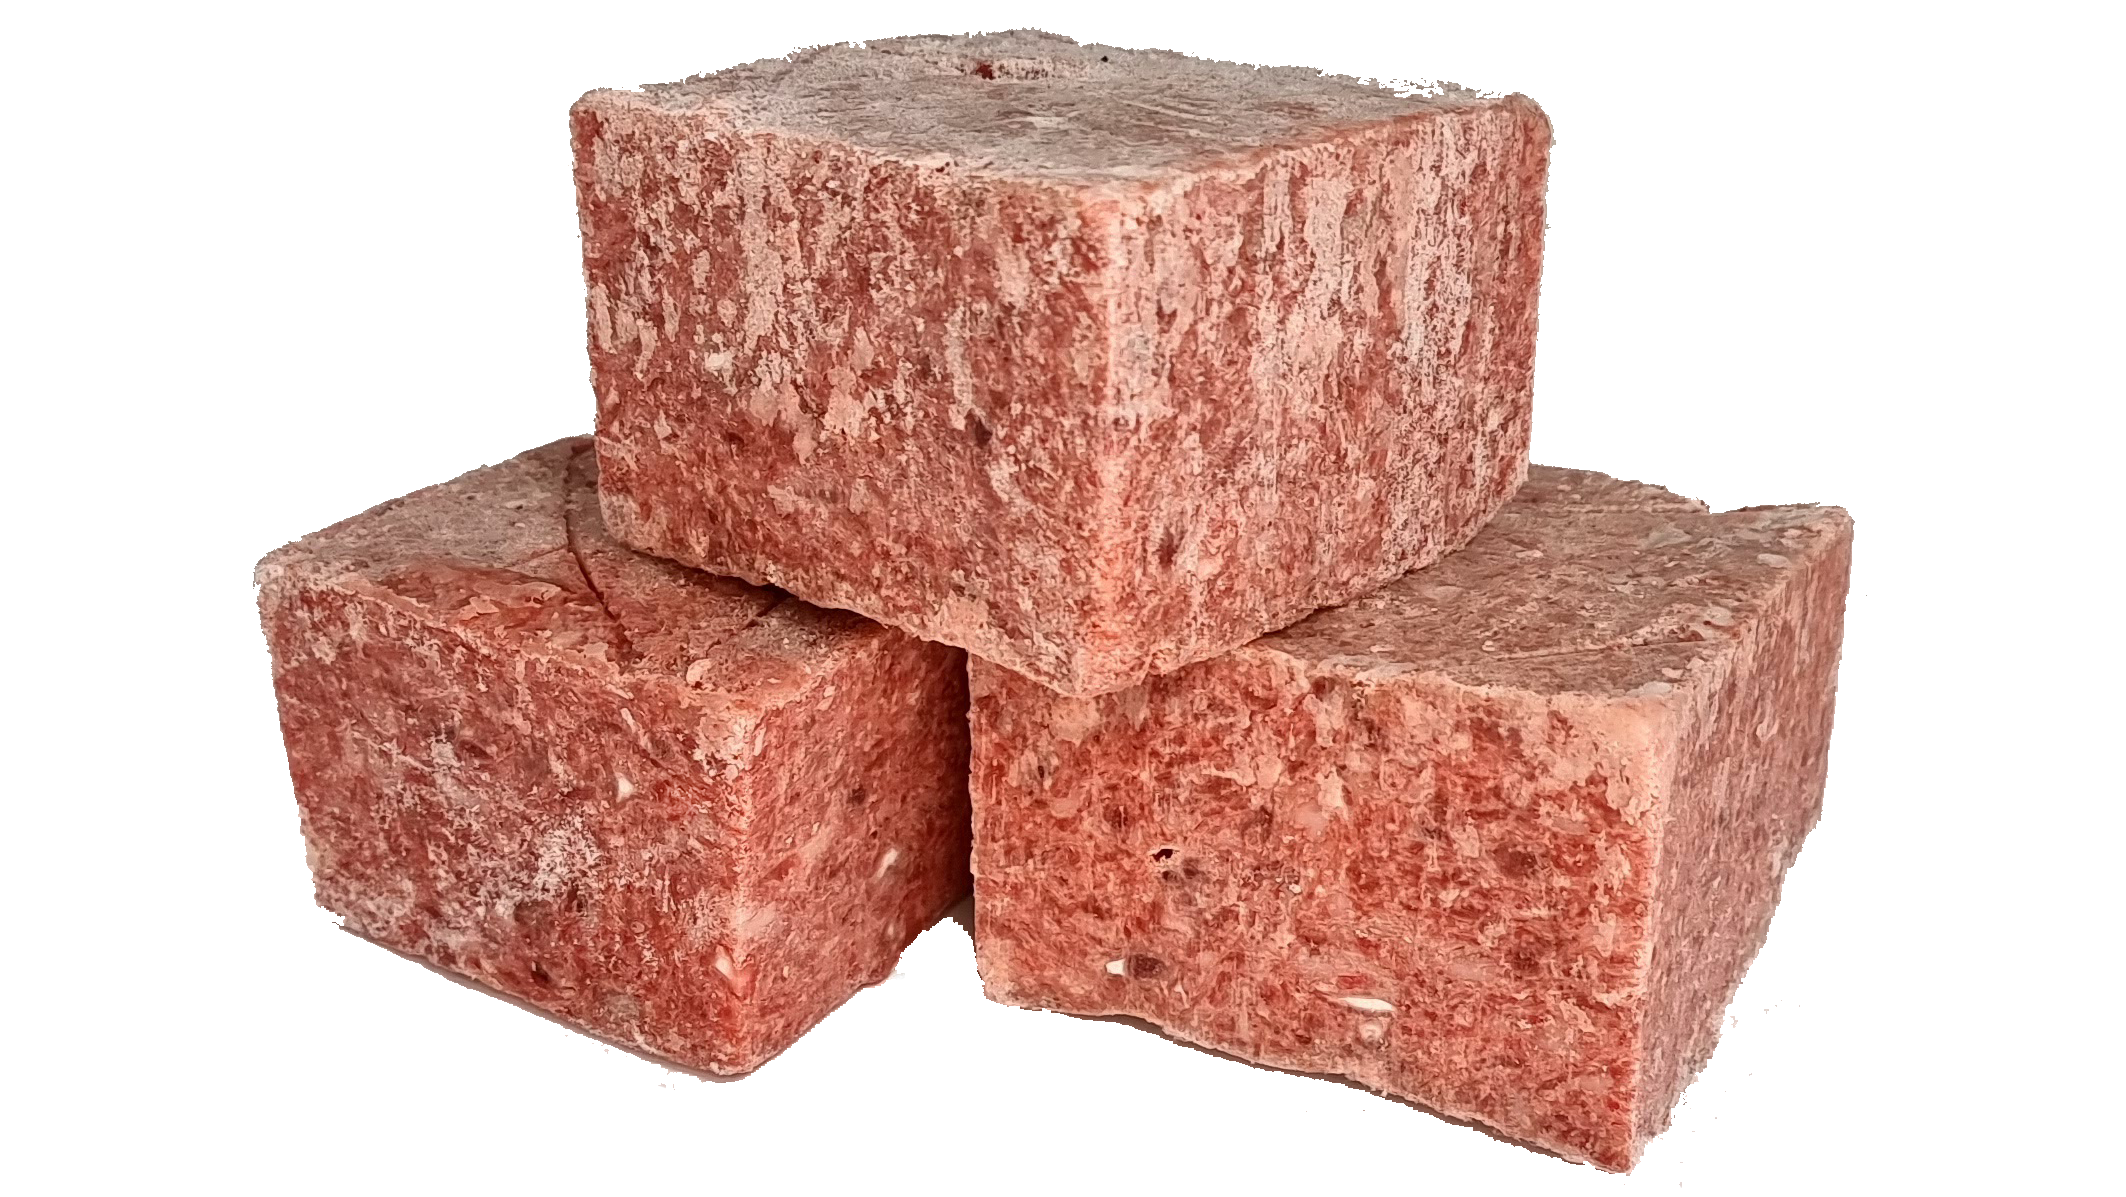 Click & Collect from MALDON - Minced Chicken with bone 10kgs - 10 unwrapped blocks of Raw Frozen Mince